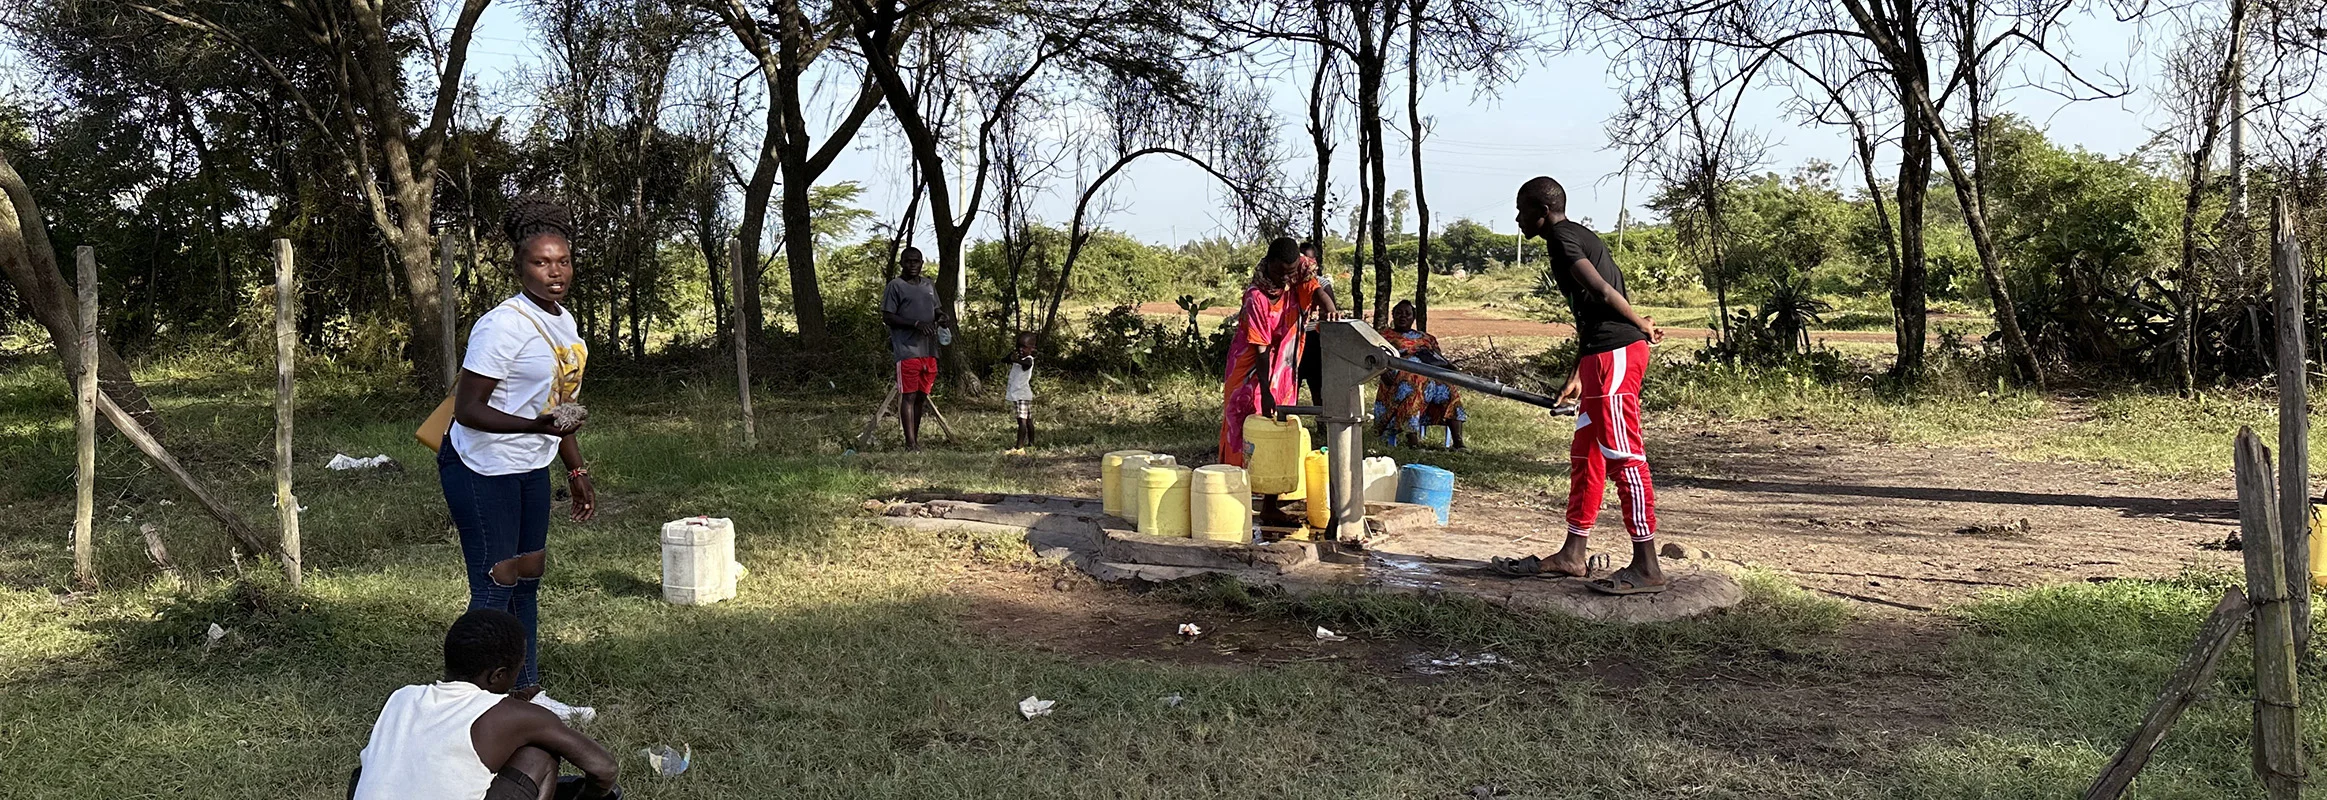 Local residents gather around a WellBoring hand-pump well in a rural African setting, drawing clean water for their daily needs.